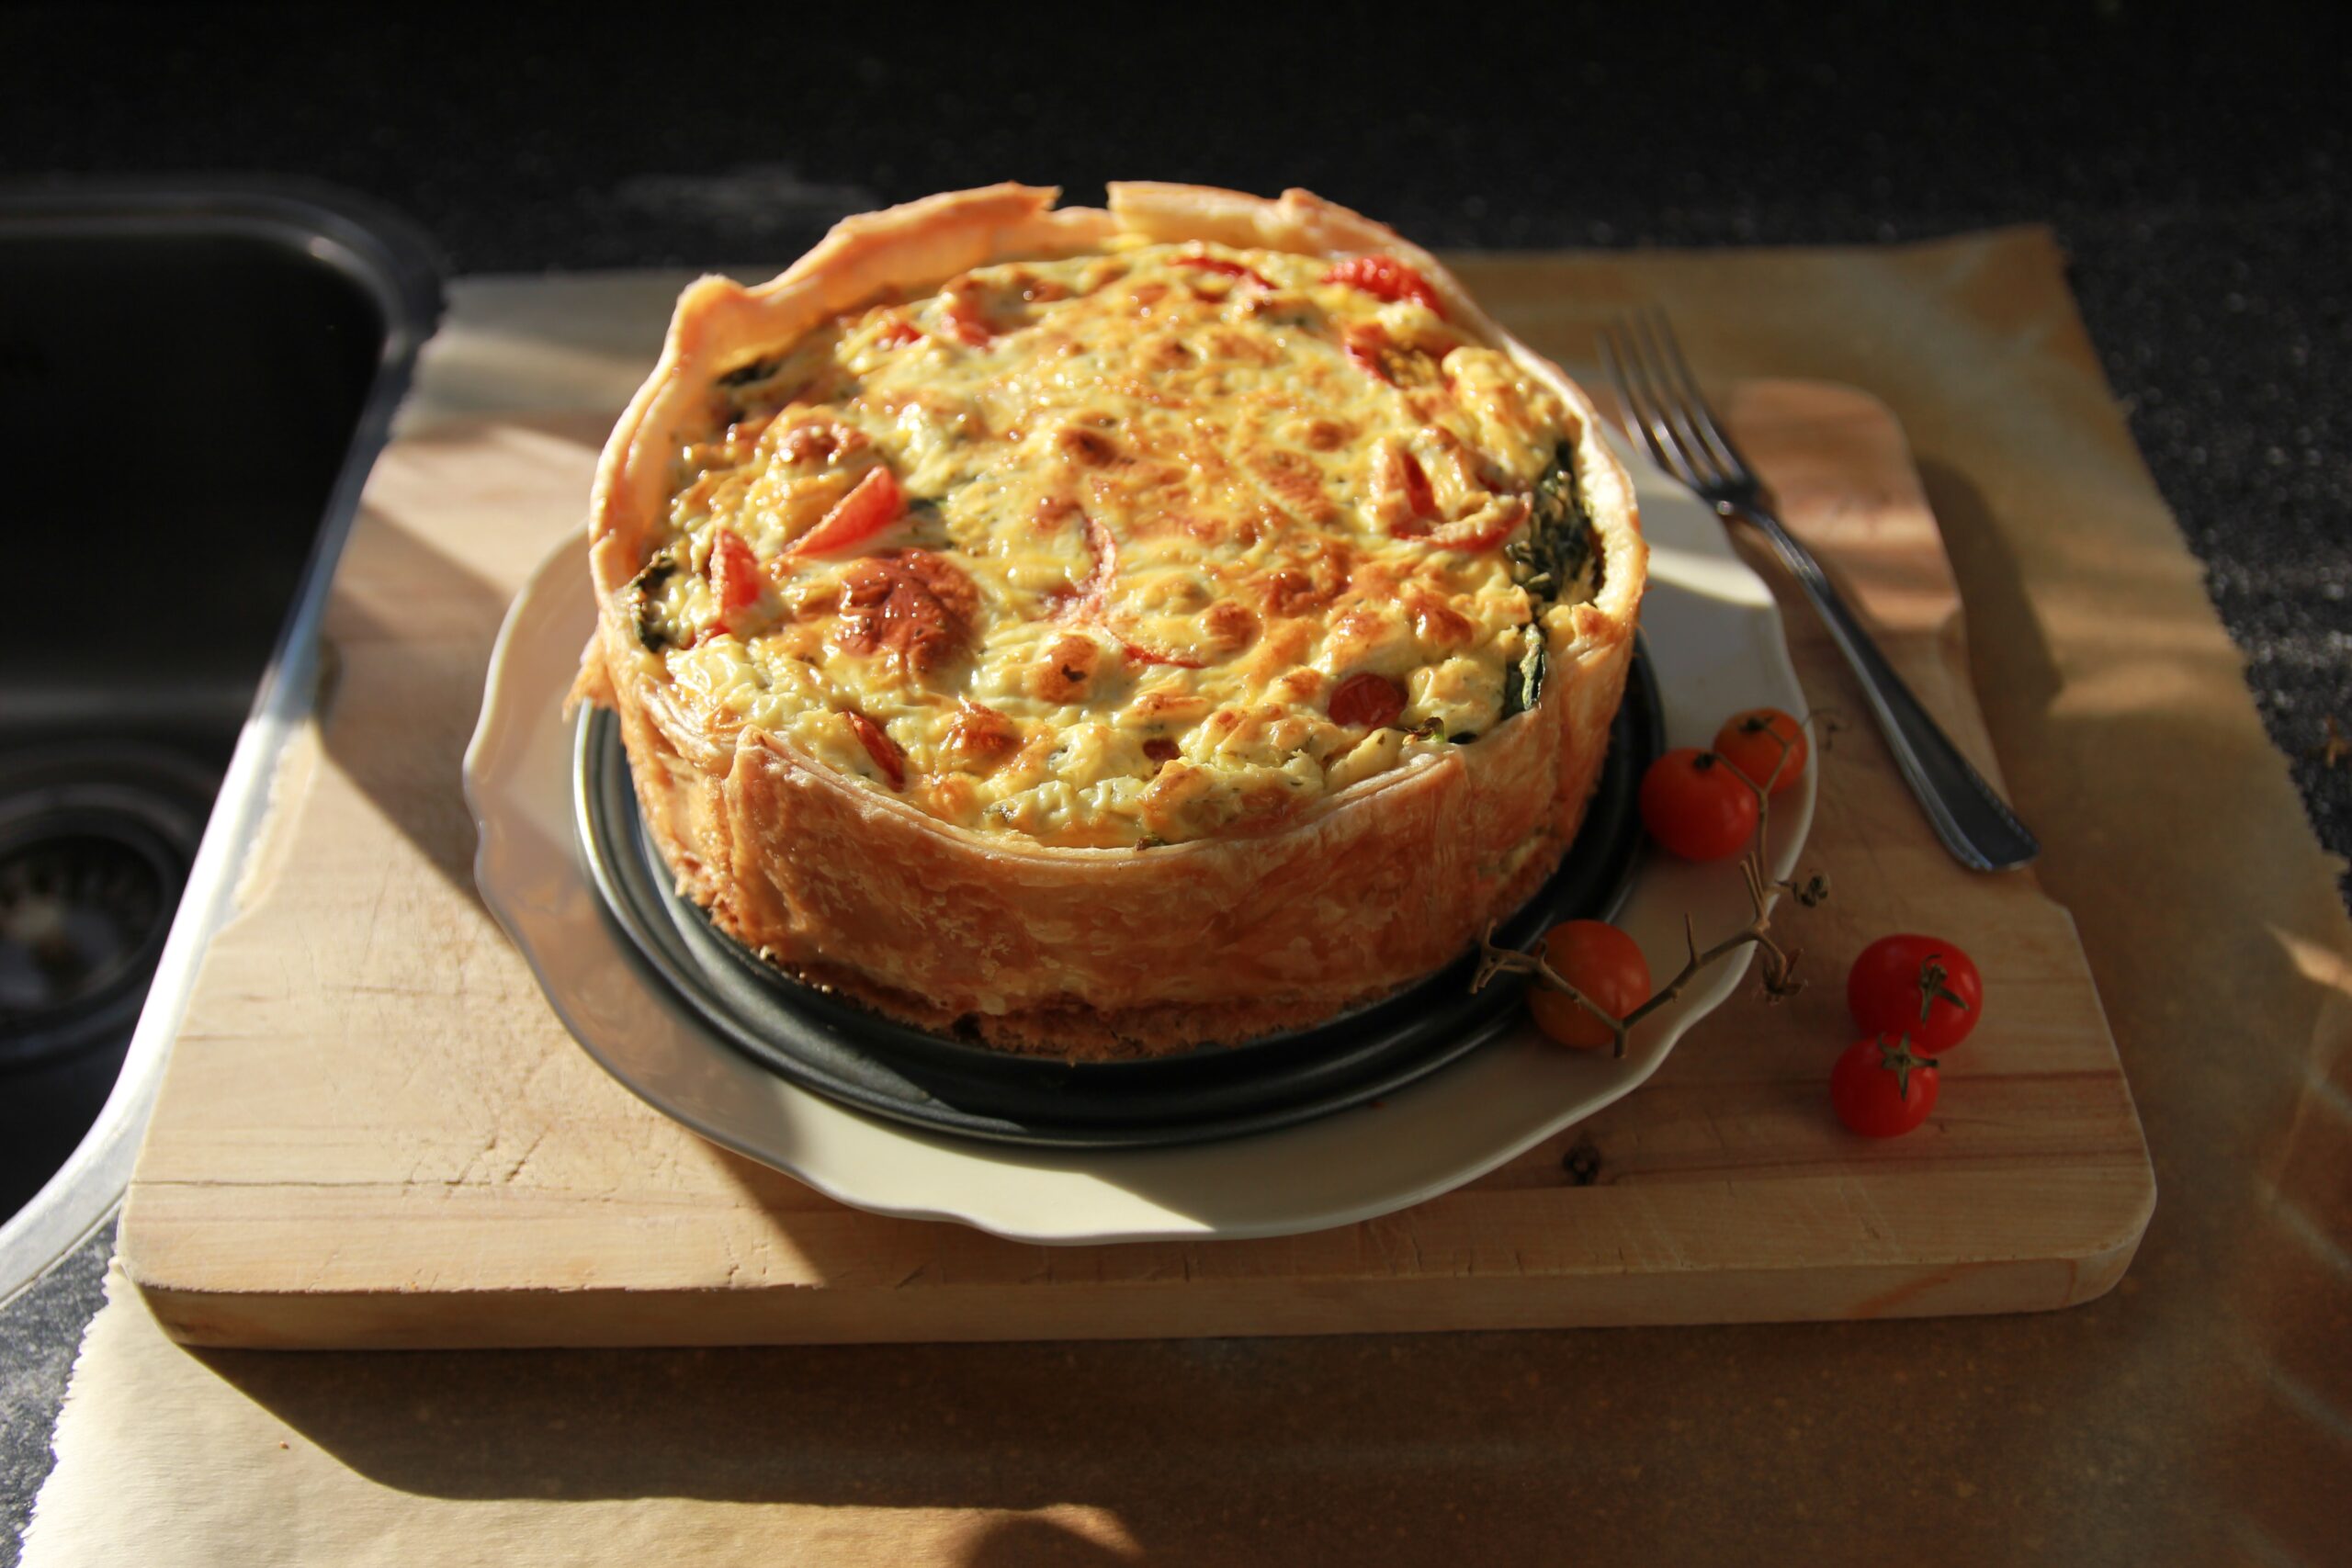 quiche on the plate